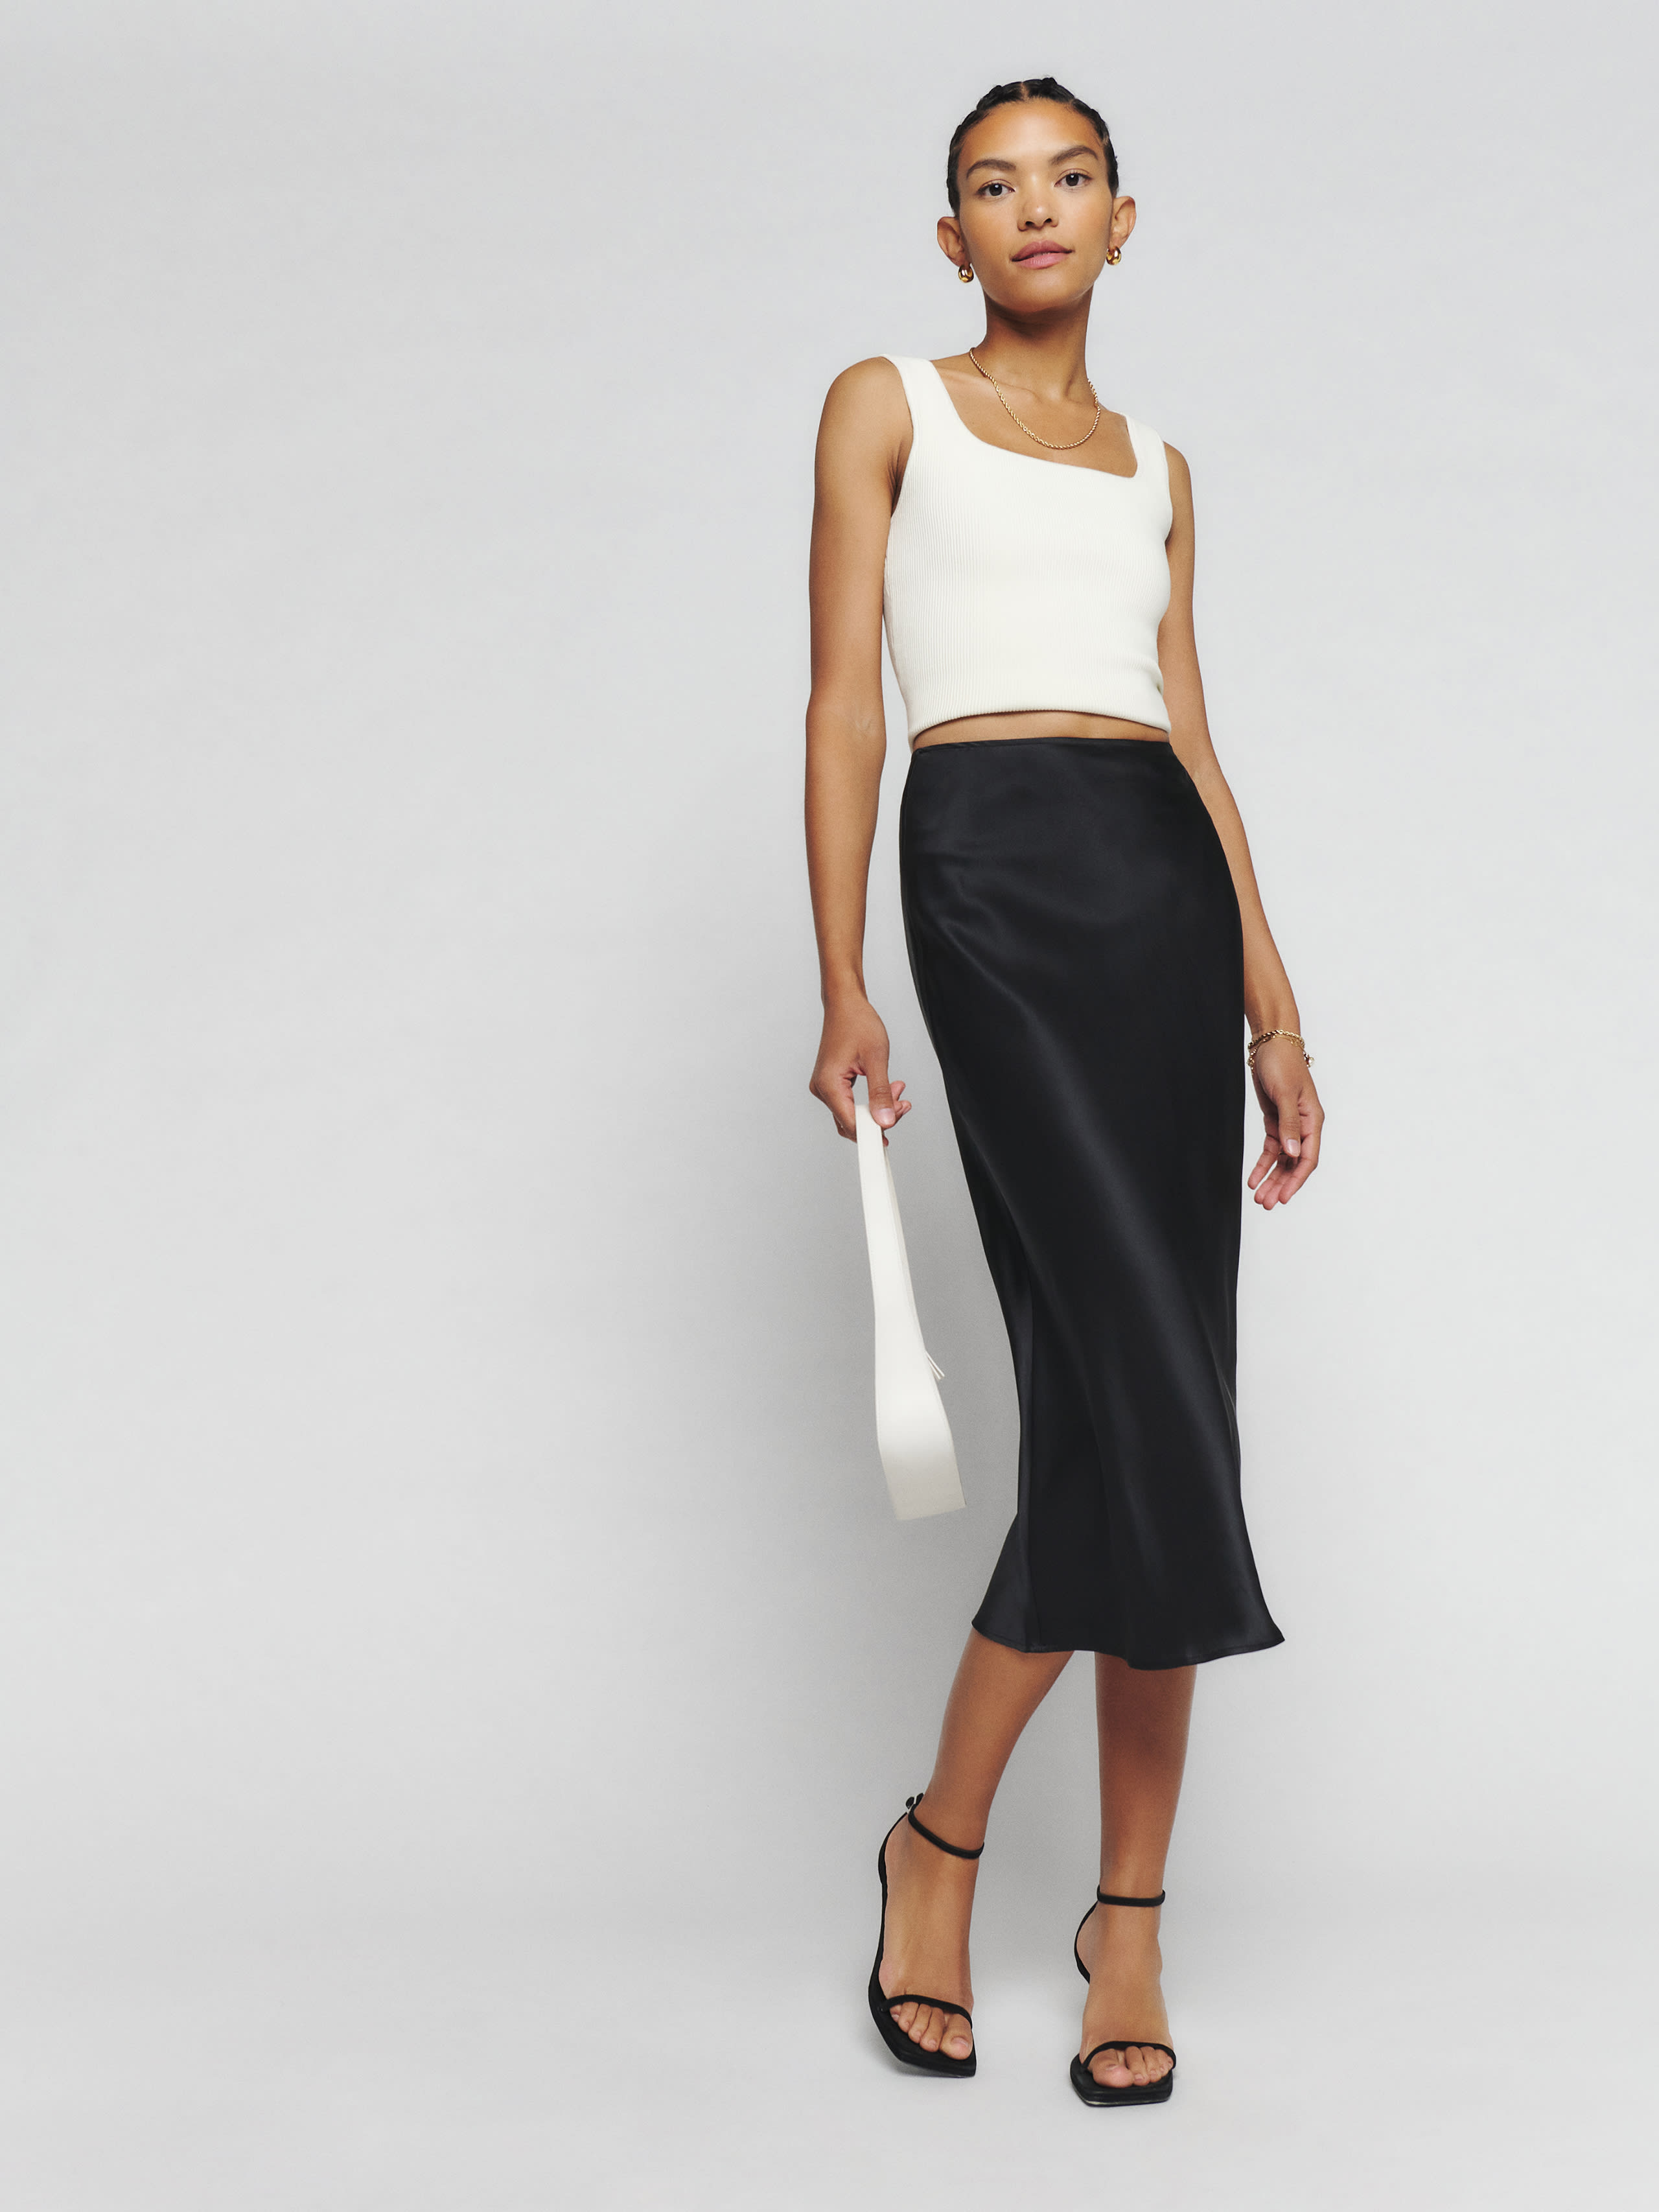 Sustainable Skirts | Long, Short, and Midi Skirts | Reformation